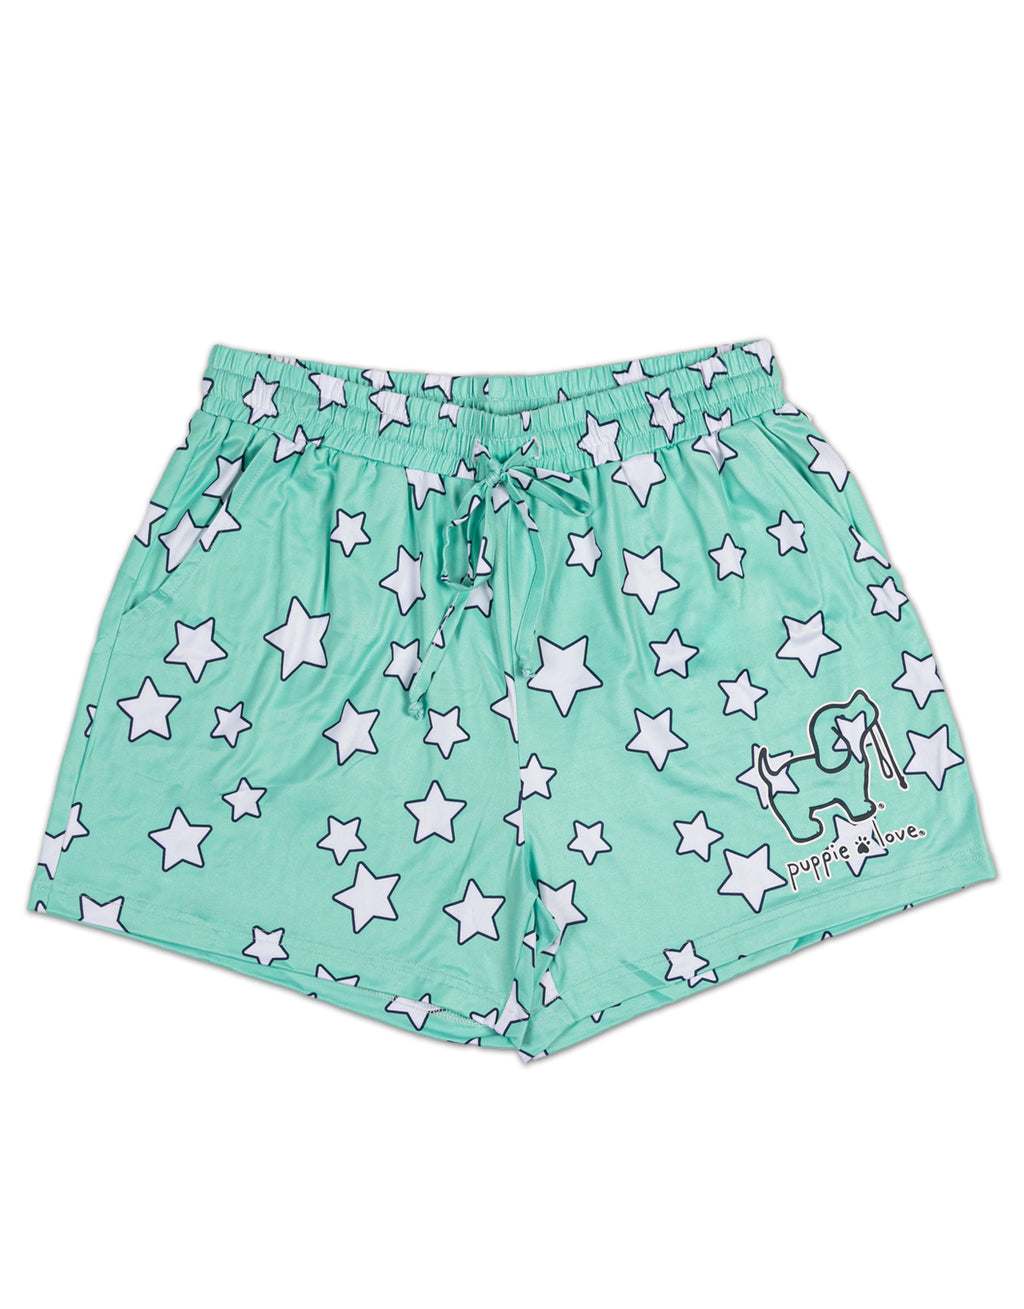 STARRY PUP LOUNGE SHORTS - Puppie Love